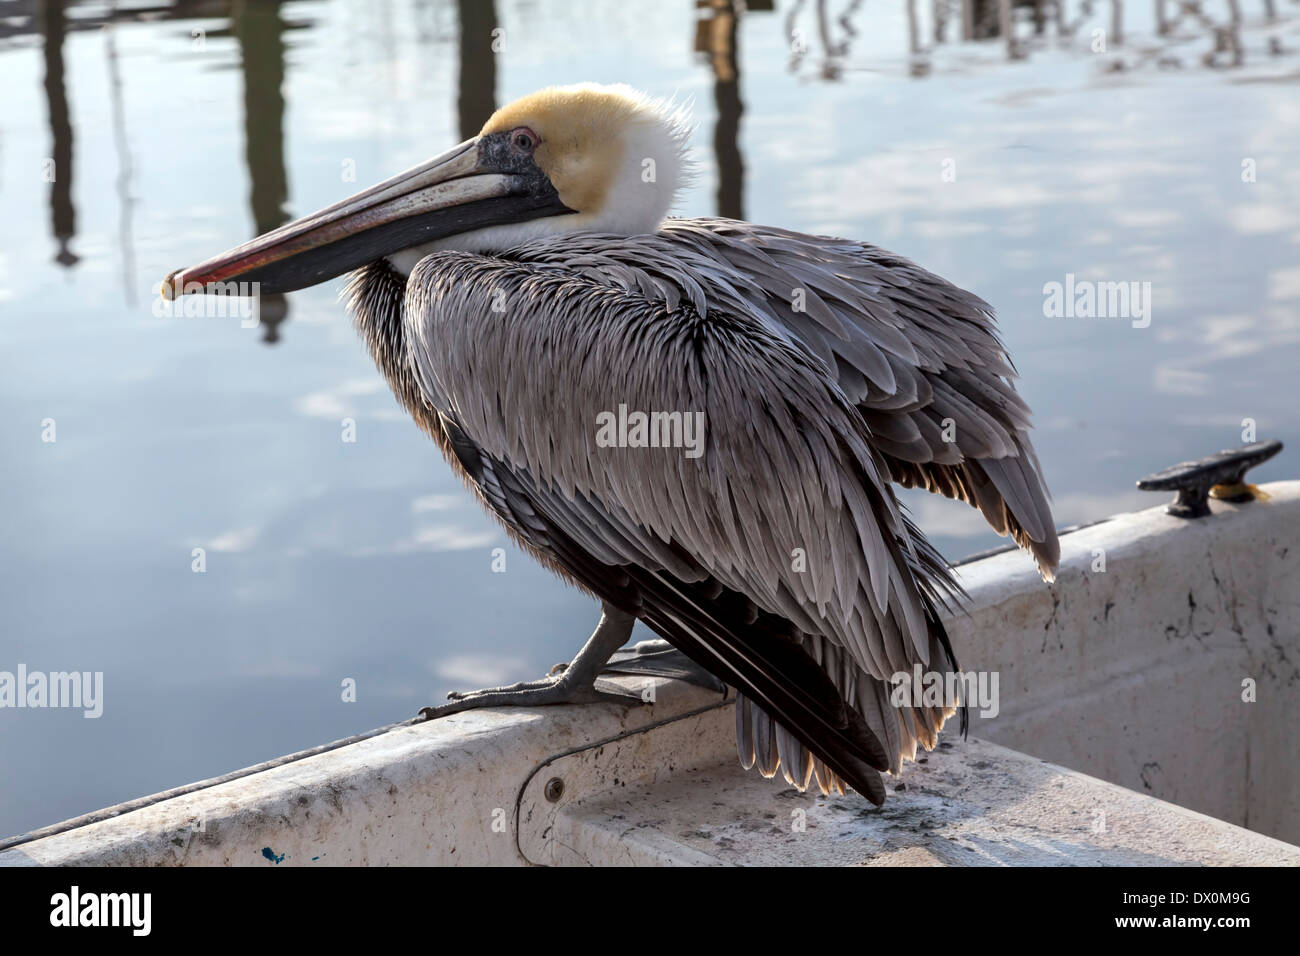 Mature adult Brown Pelican (Pelecanus occidentalis) sea bird with white head perched while ruffling feathers. Stock Photo